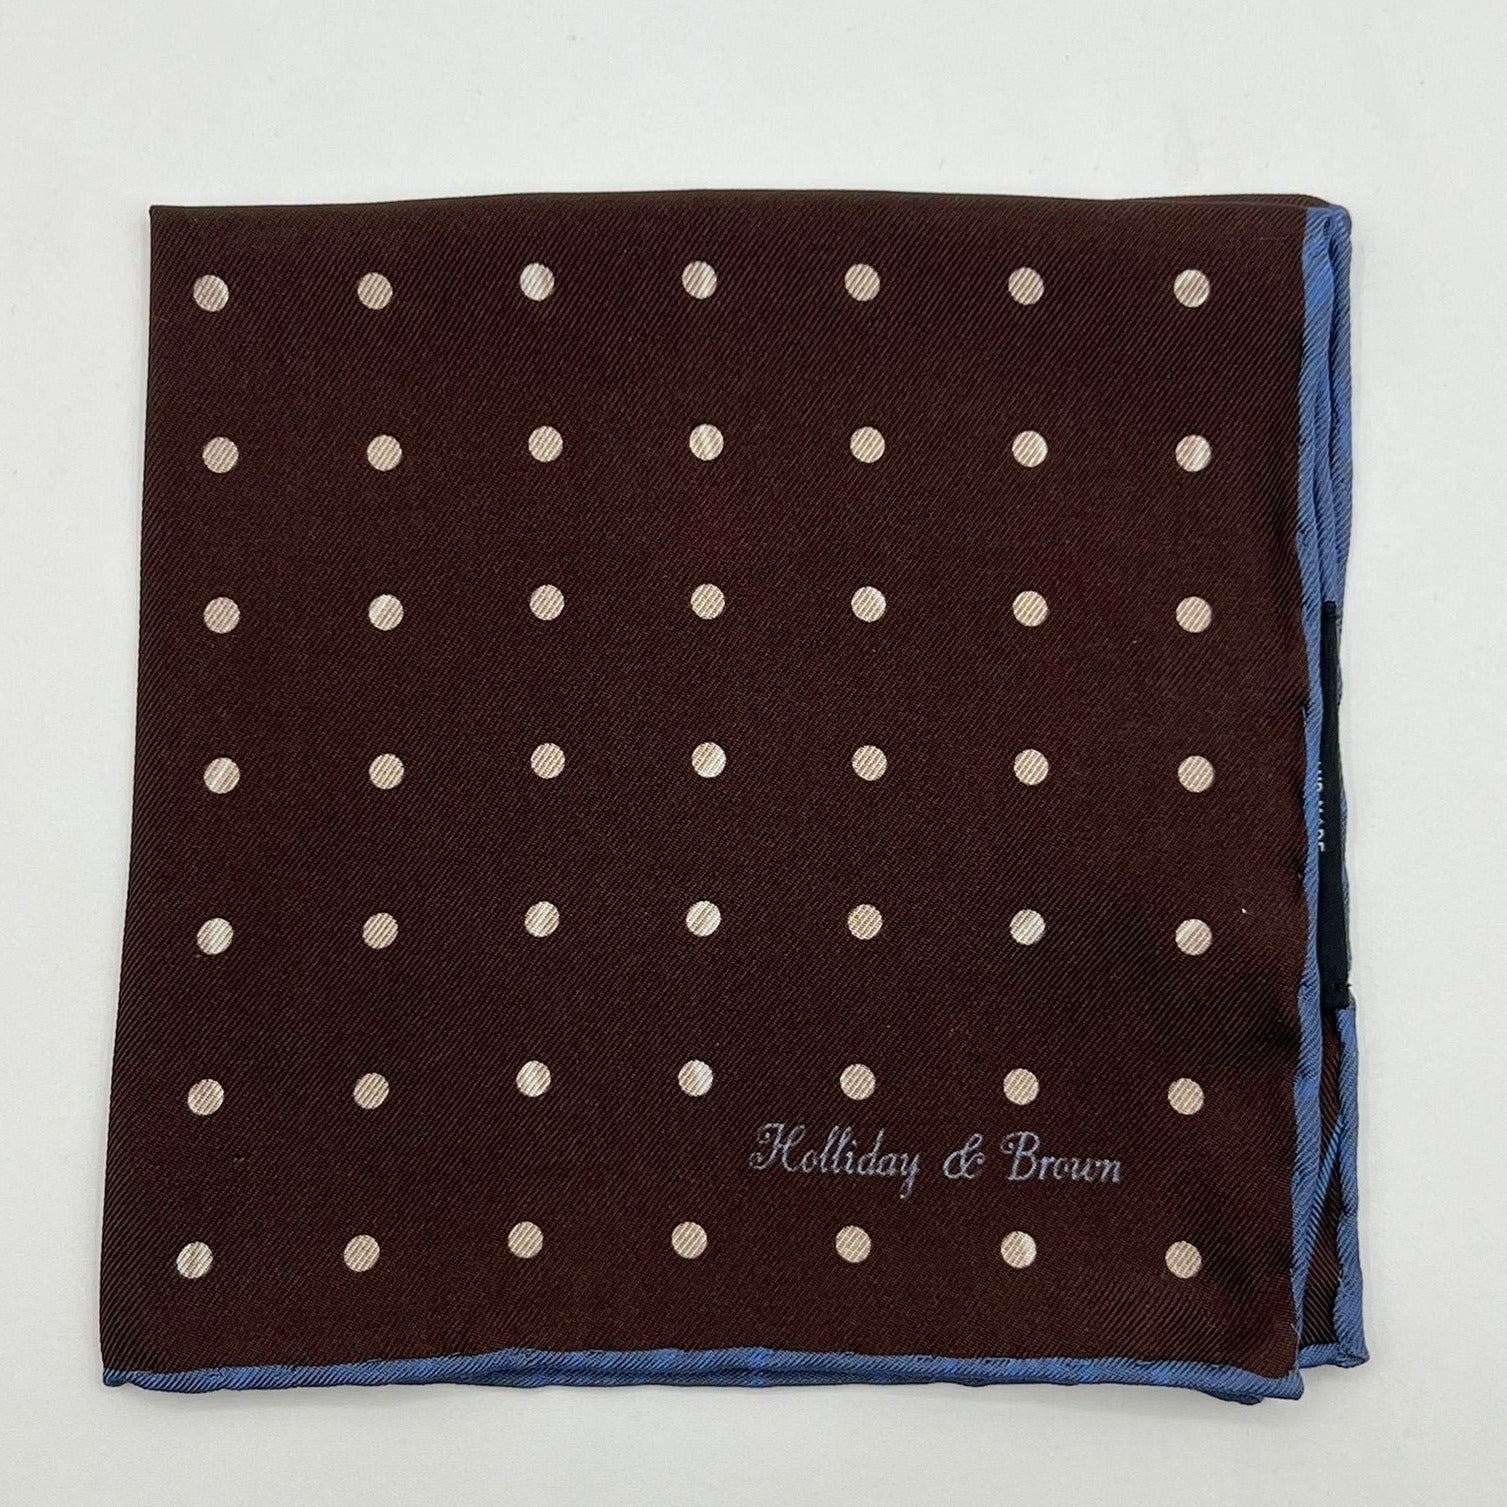 Holliday & Brown Hand-rolled   Holliday & Brown for Cruciani & Bella 100% Silk Brown and Off White Double Faces Dots Motif  Pocket Square Handmade in Italy 32 cm X 32 cm